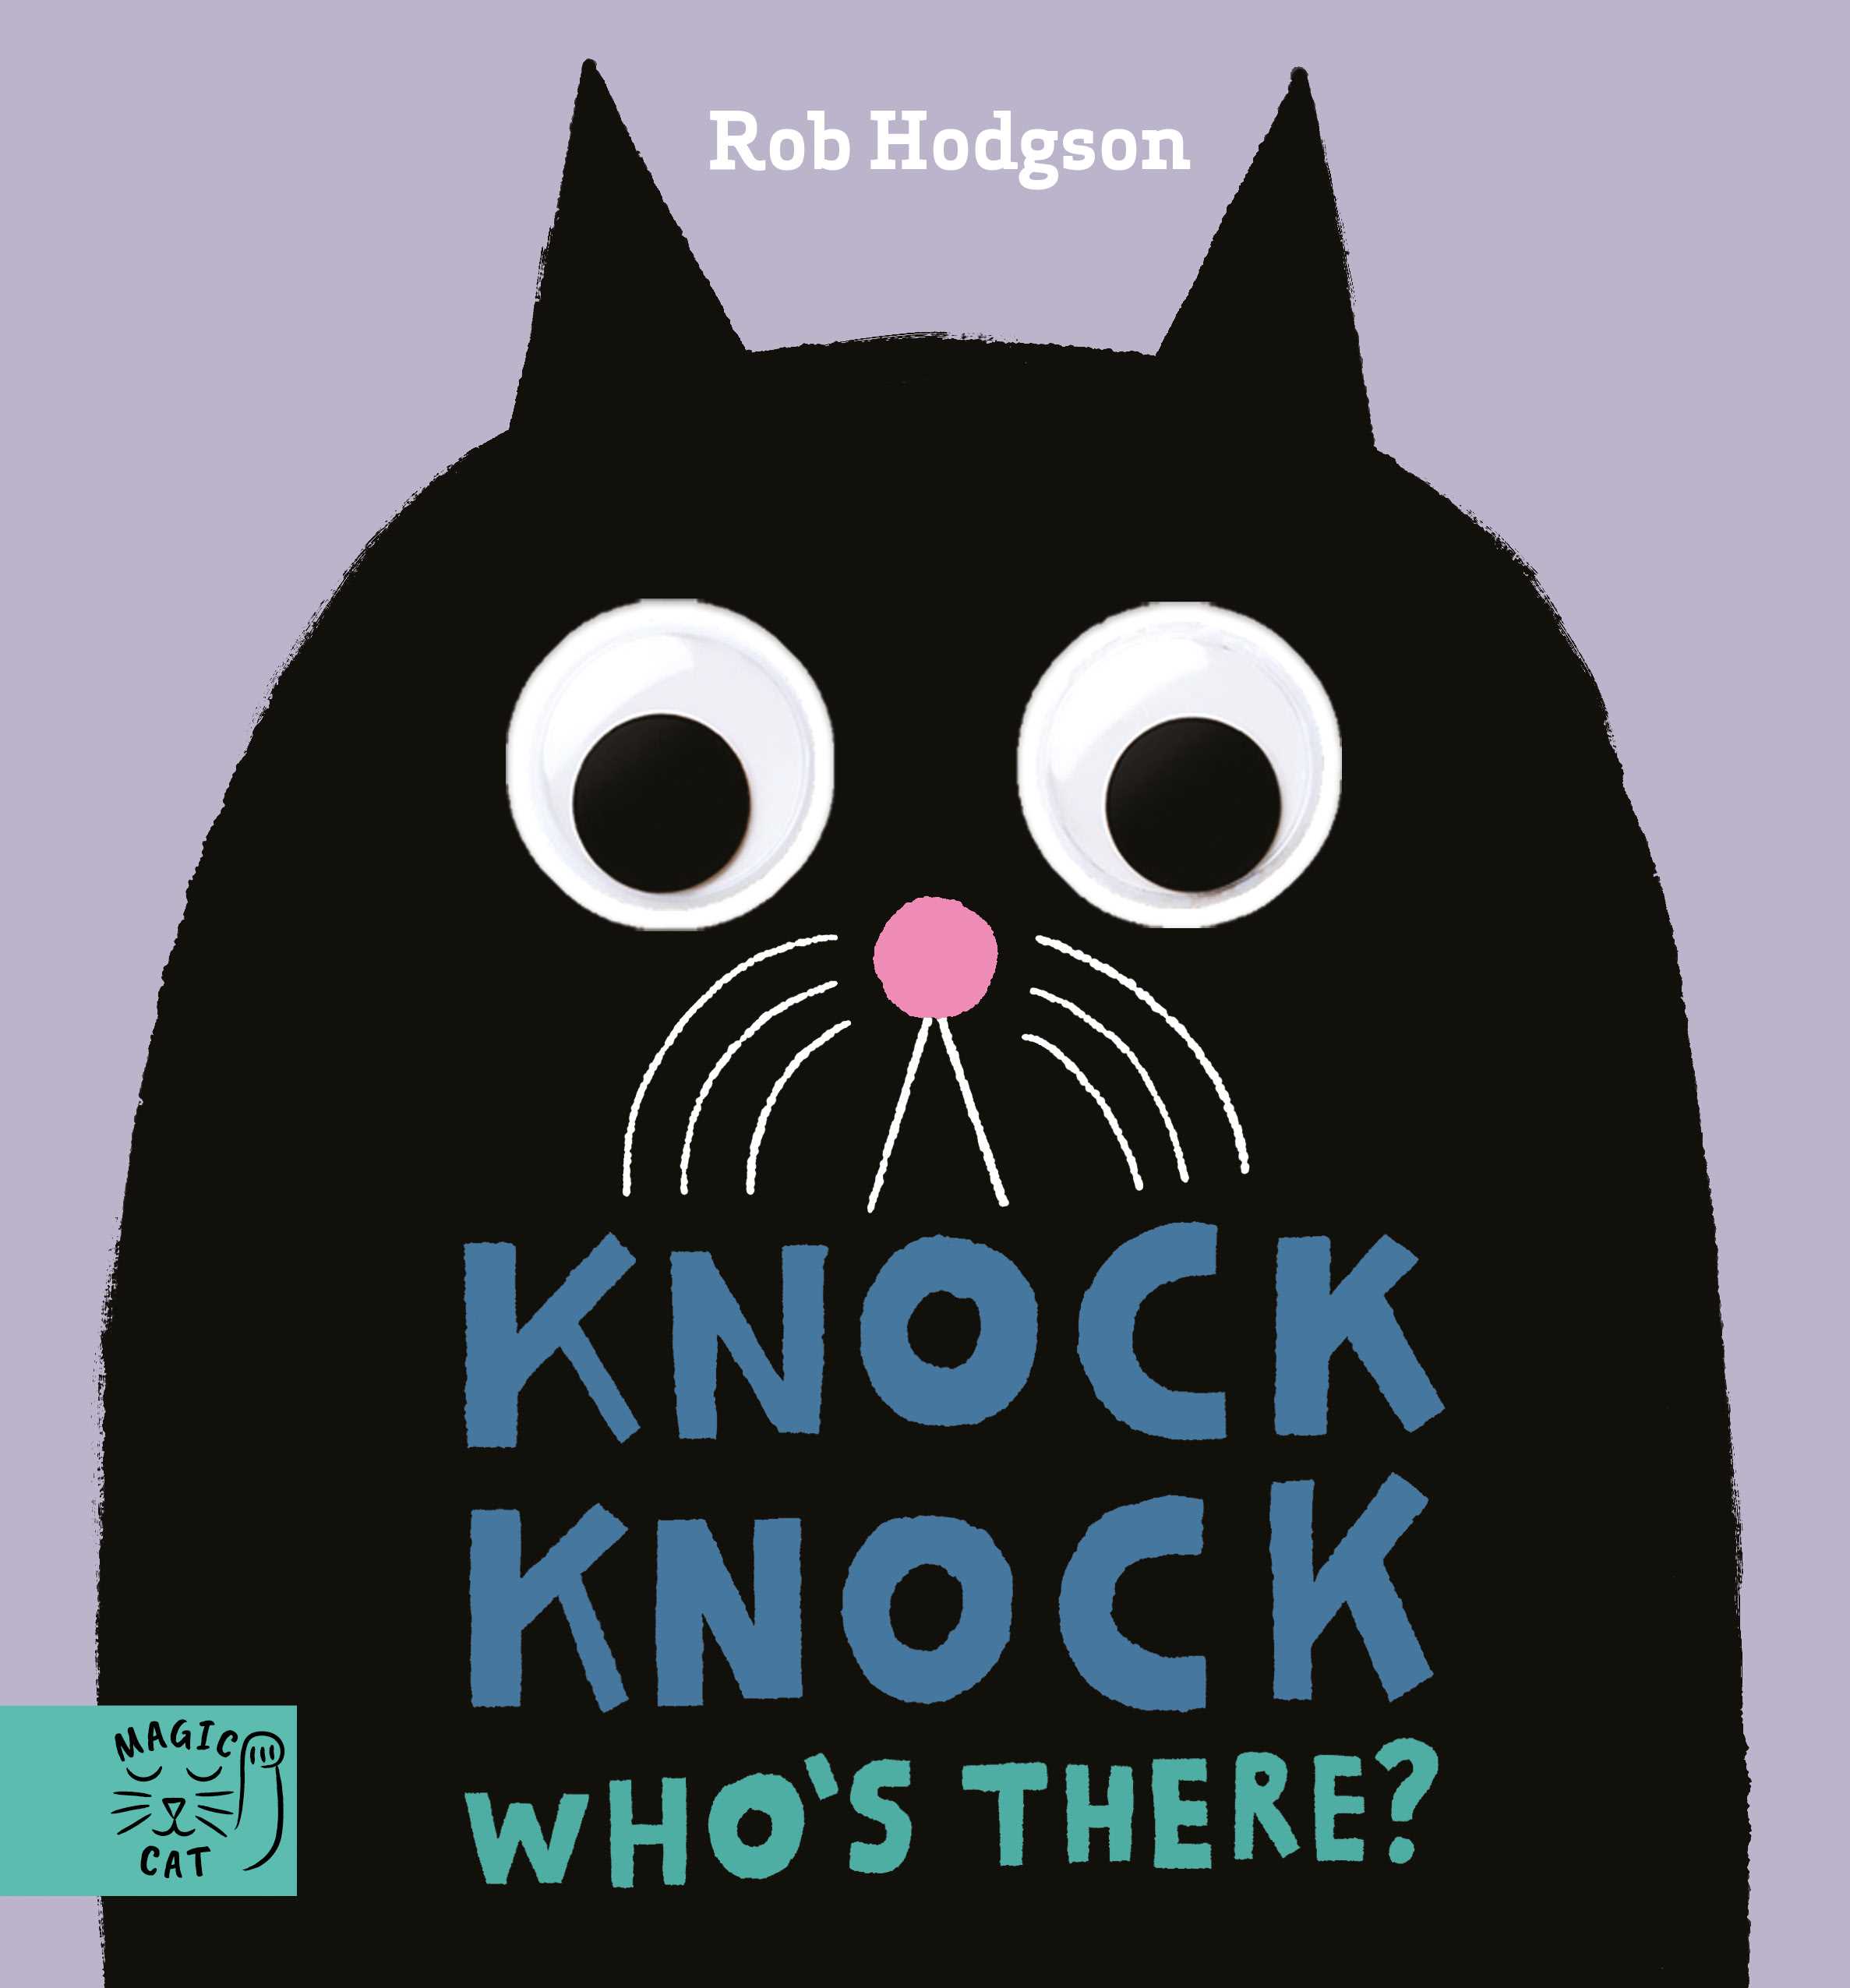 Knock Knock… Who's there?